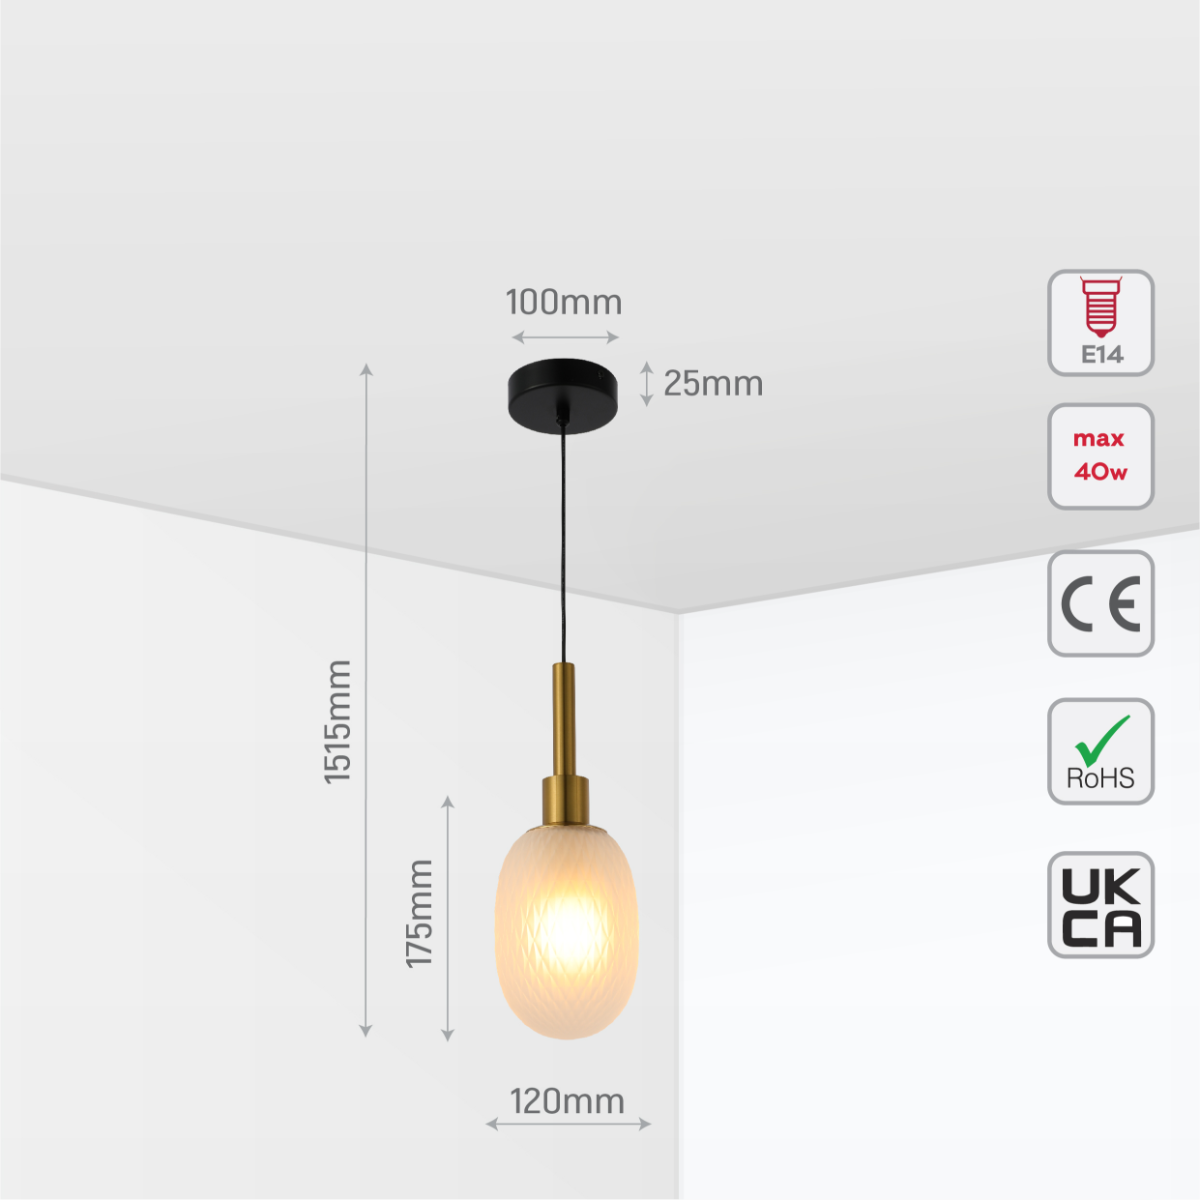 Size and certifications of Opalescent Ellipsoid Pendant Light with Gold Detail 150-19020